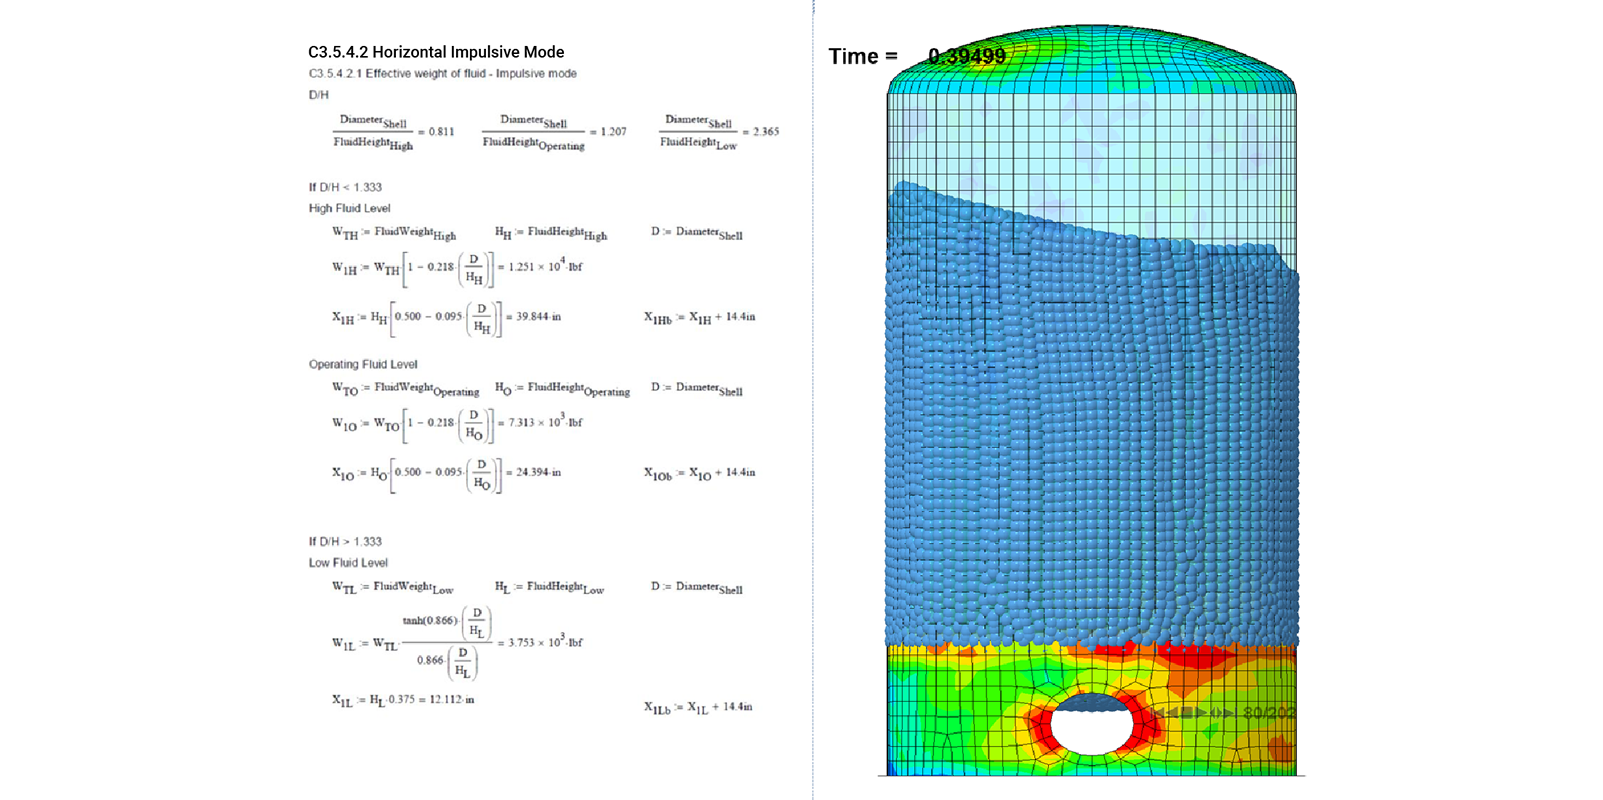 Hand-calculations using ASCE 4-98 is the industry standard for sloshing analysis but the SPH method provides a full-field color simulation of the event with stress and base skirt reaction forces.